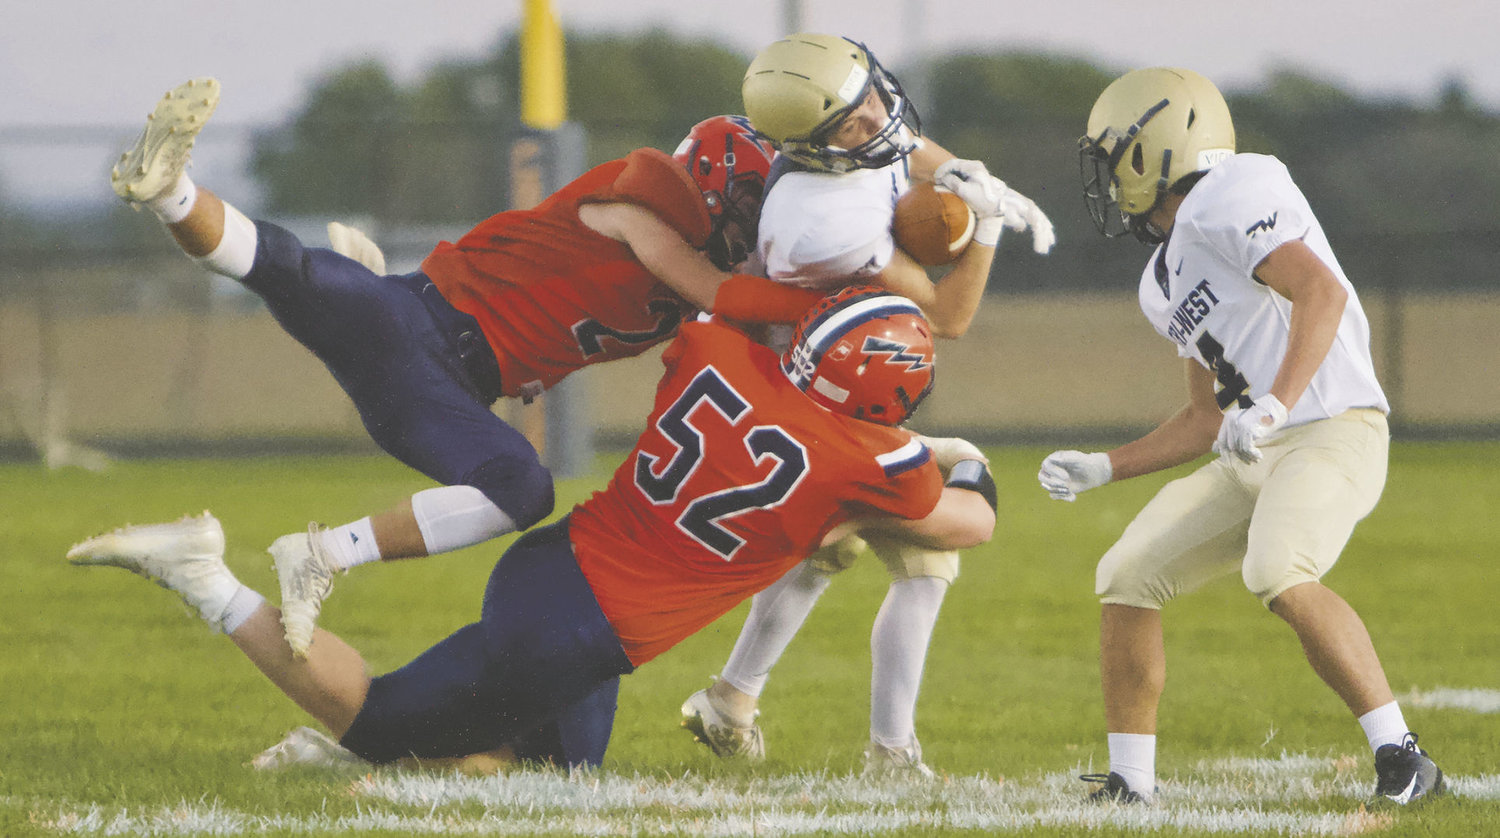 North Montgomery's Kai Warren and Drew Webster topple a Tri-West ball carrier.